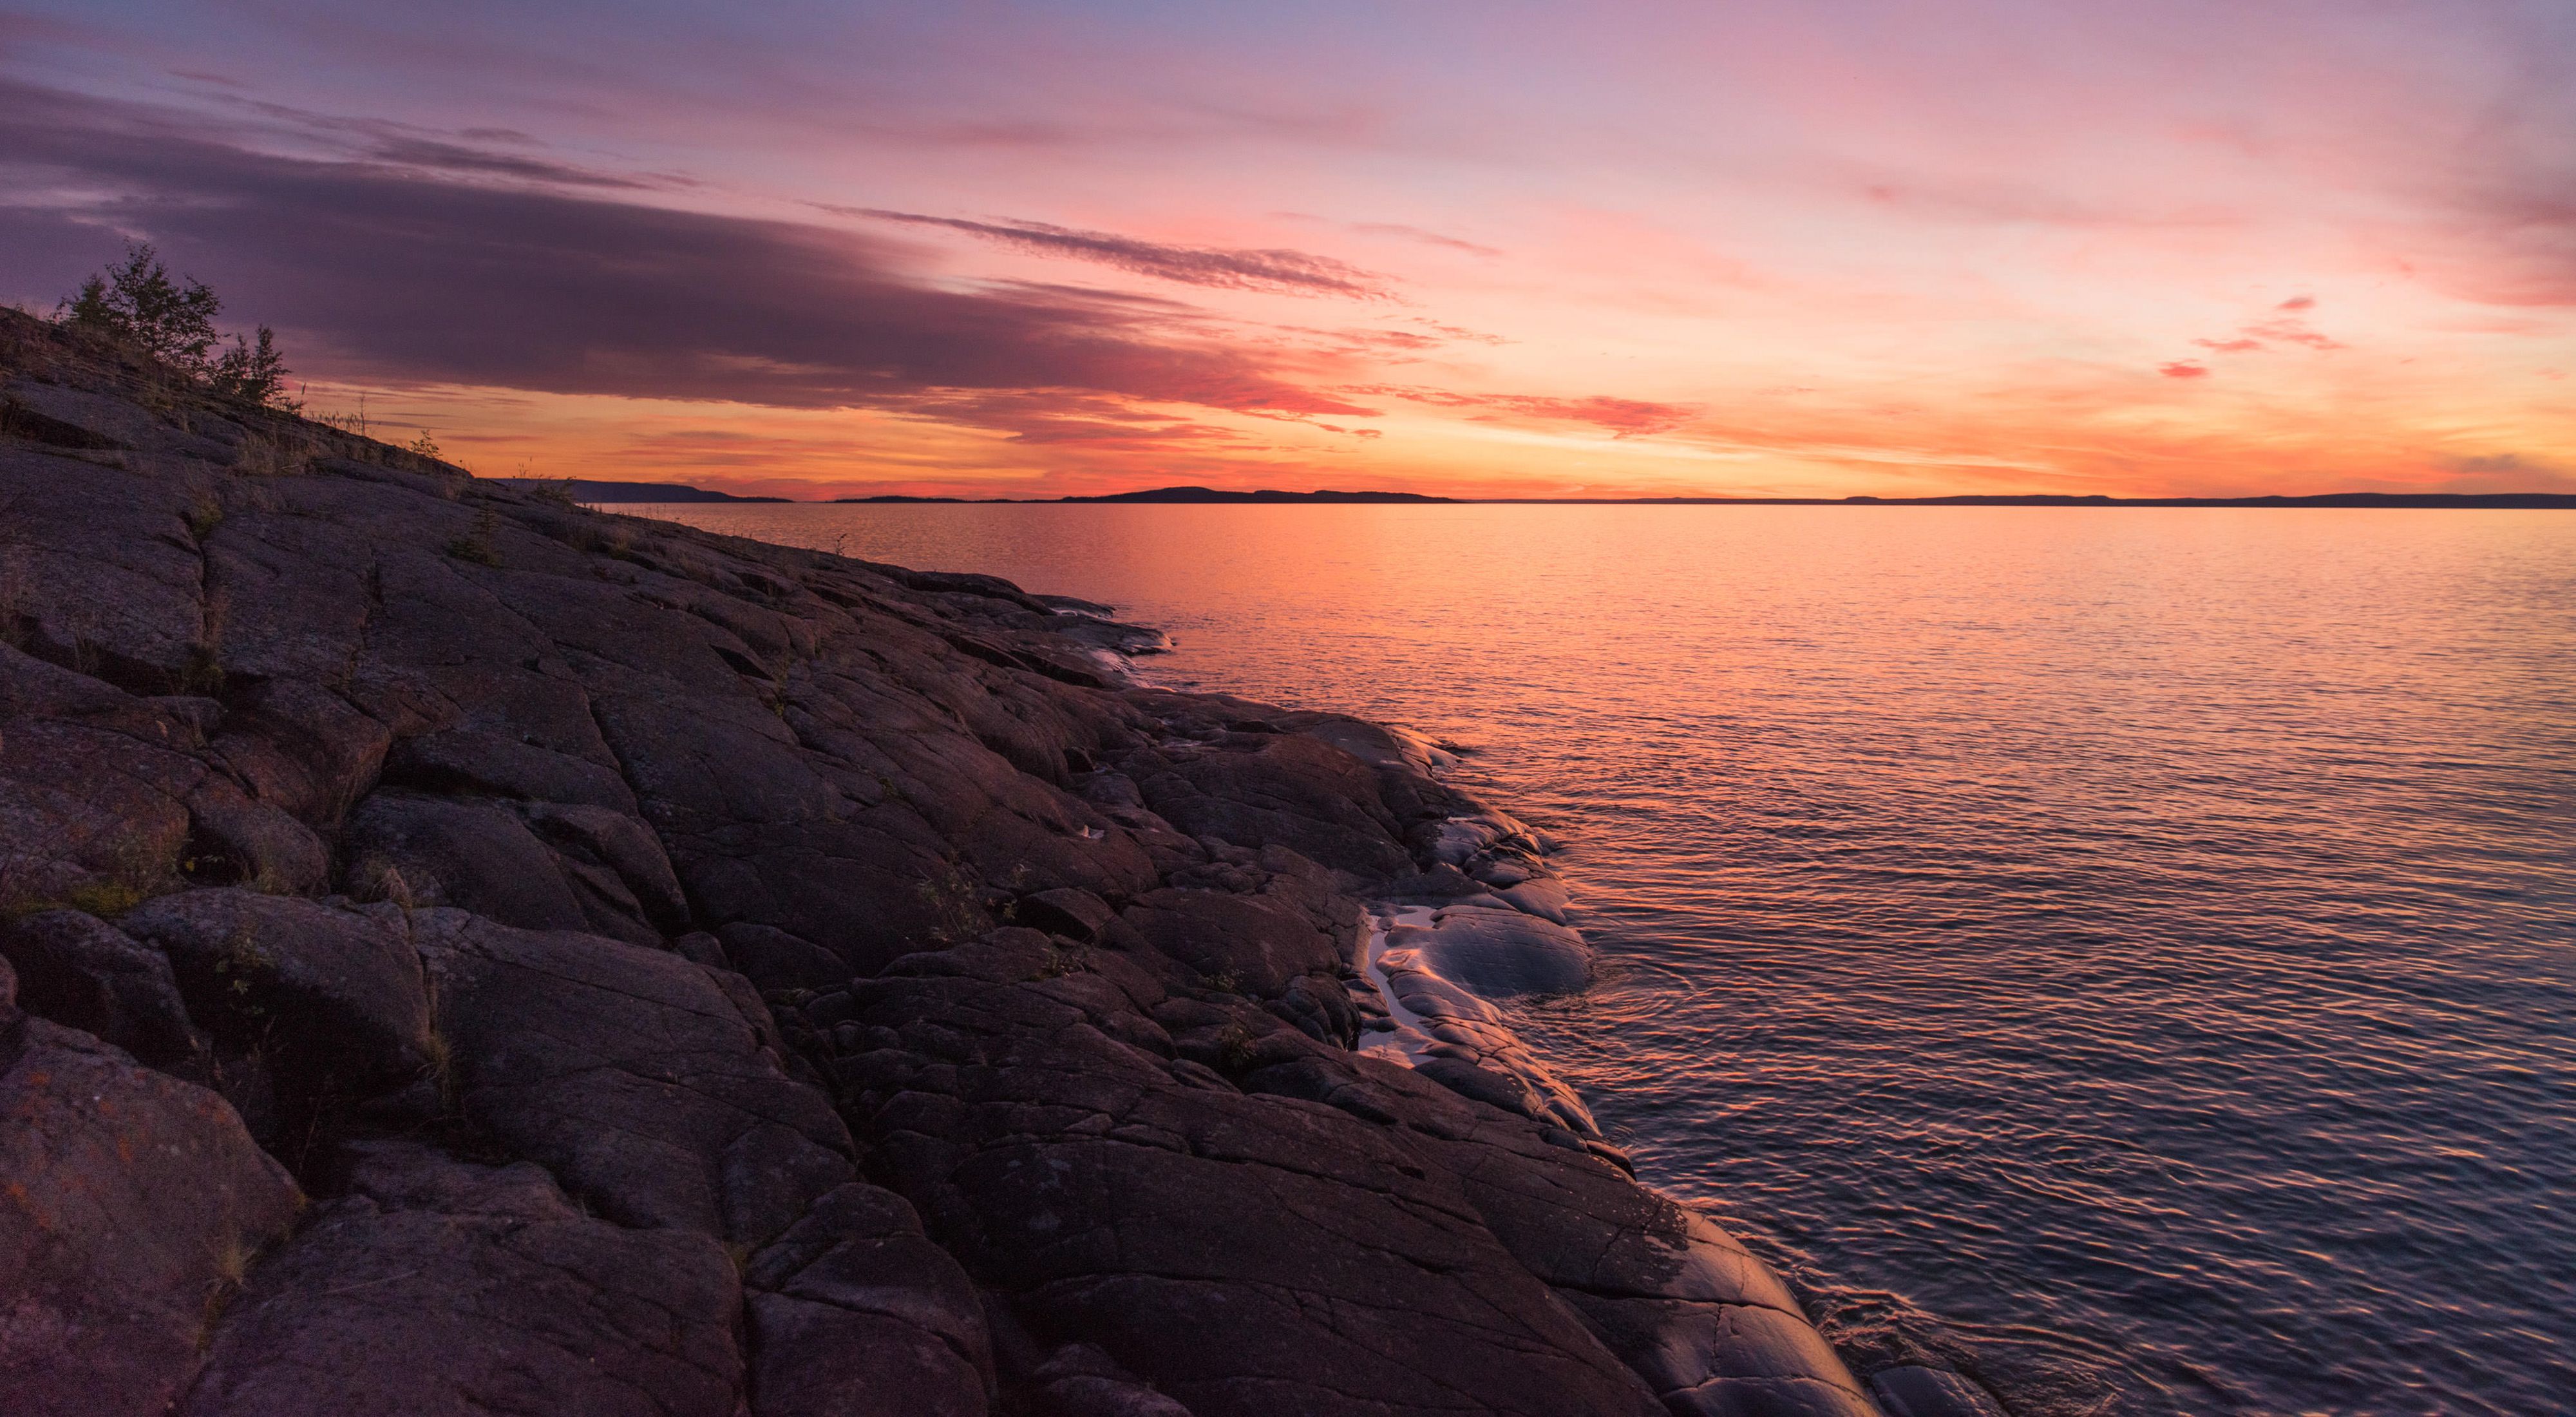 the sun sets over the rocky shoreline of great slave lake, a cold-water lake in Canada's Northwest Territories